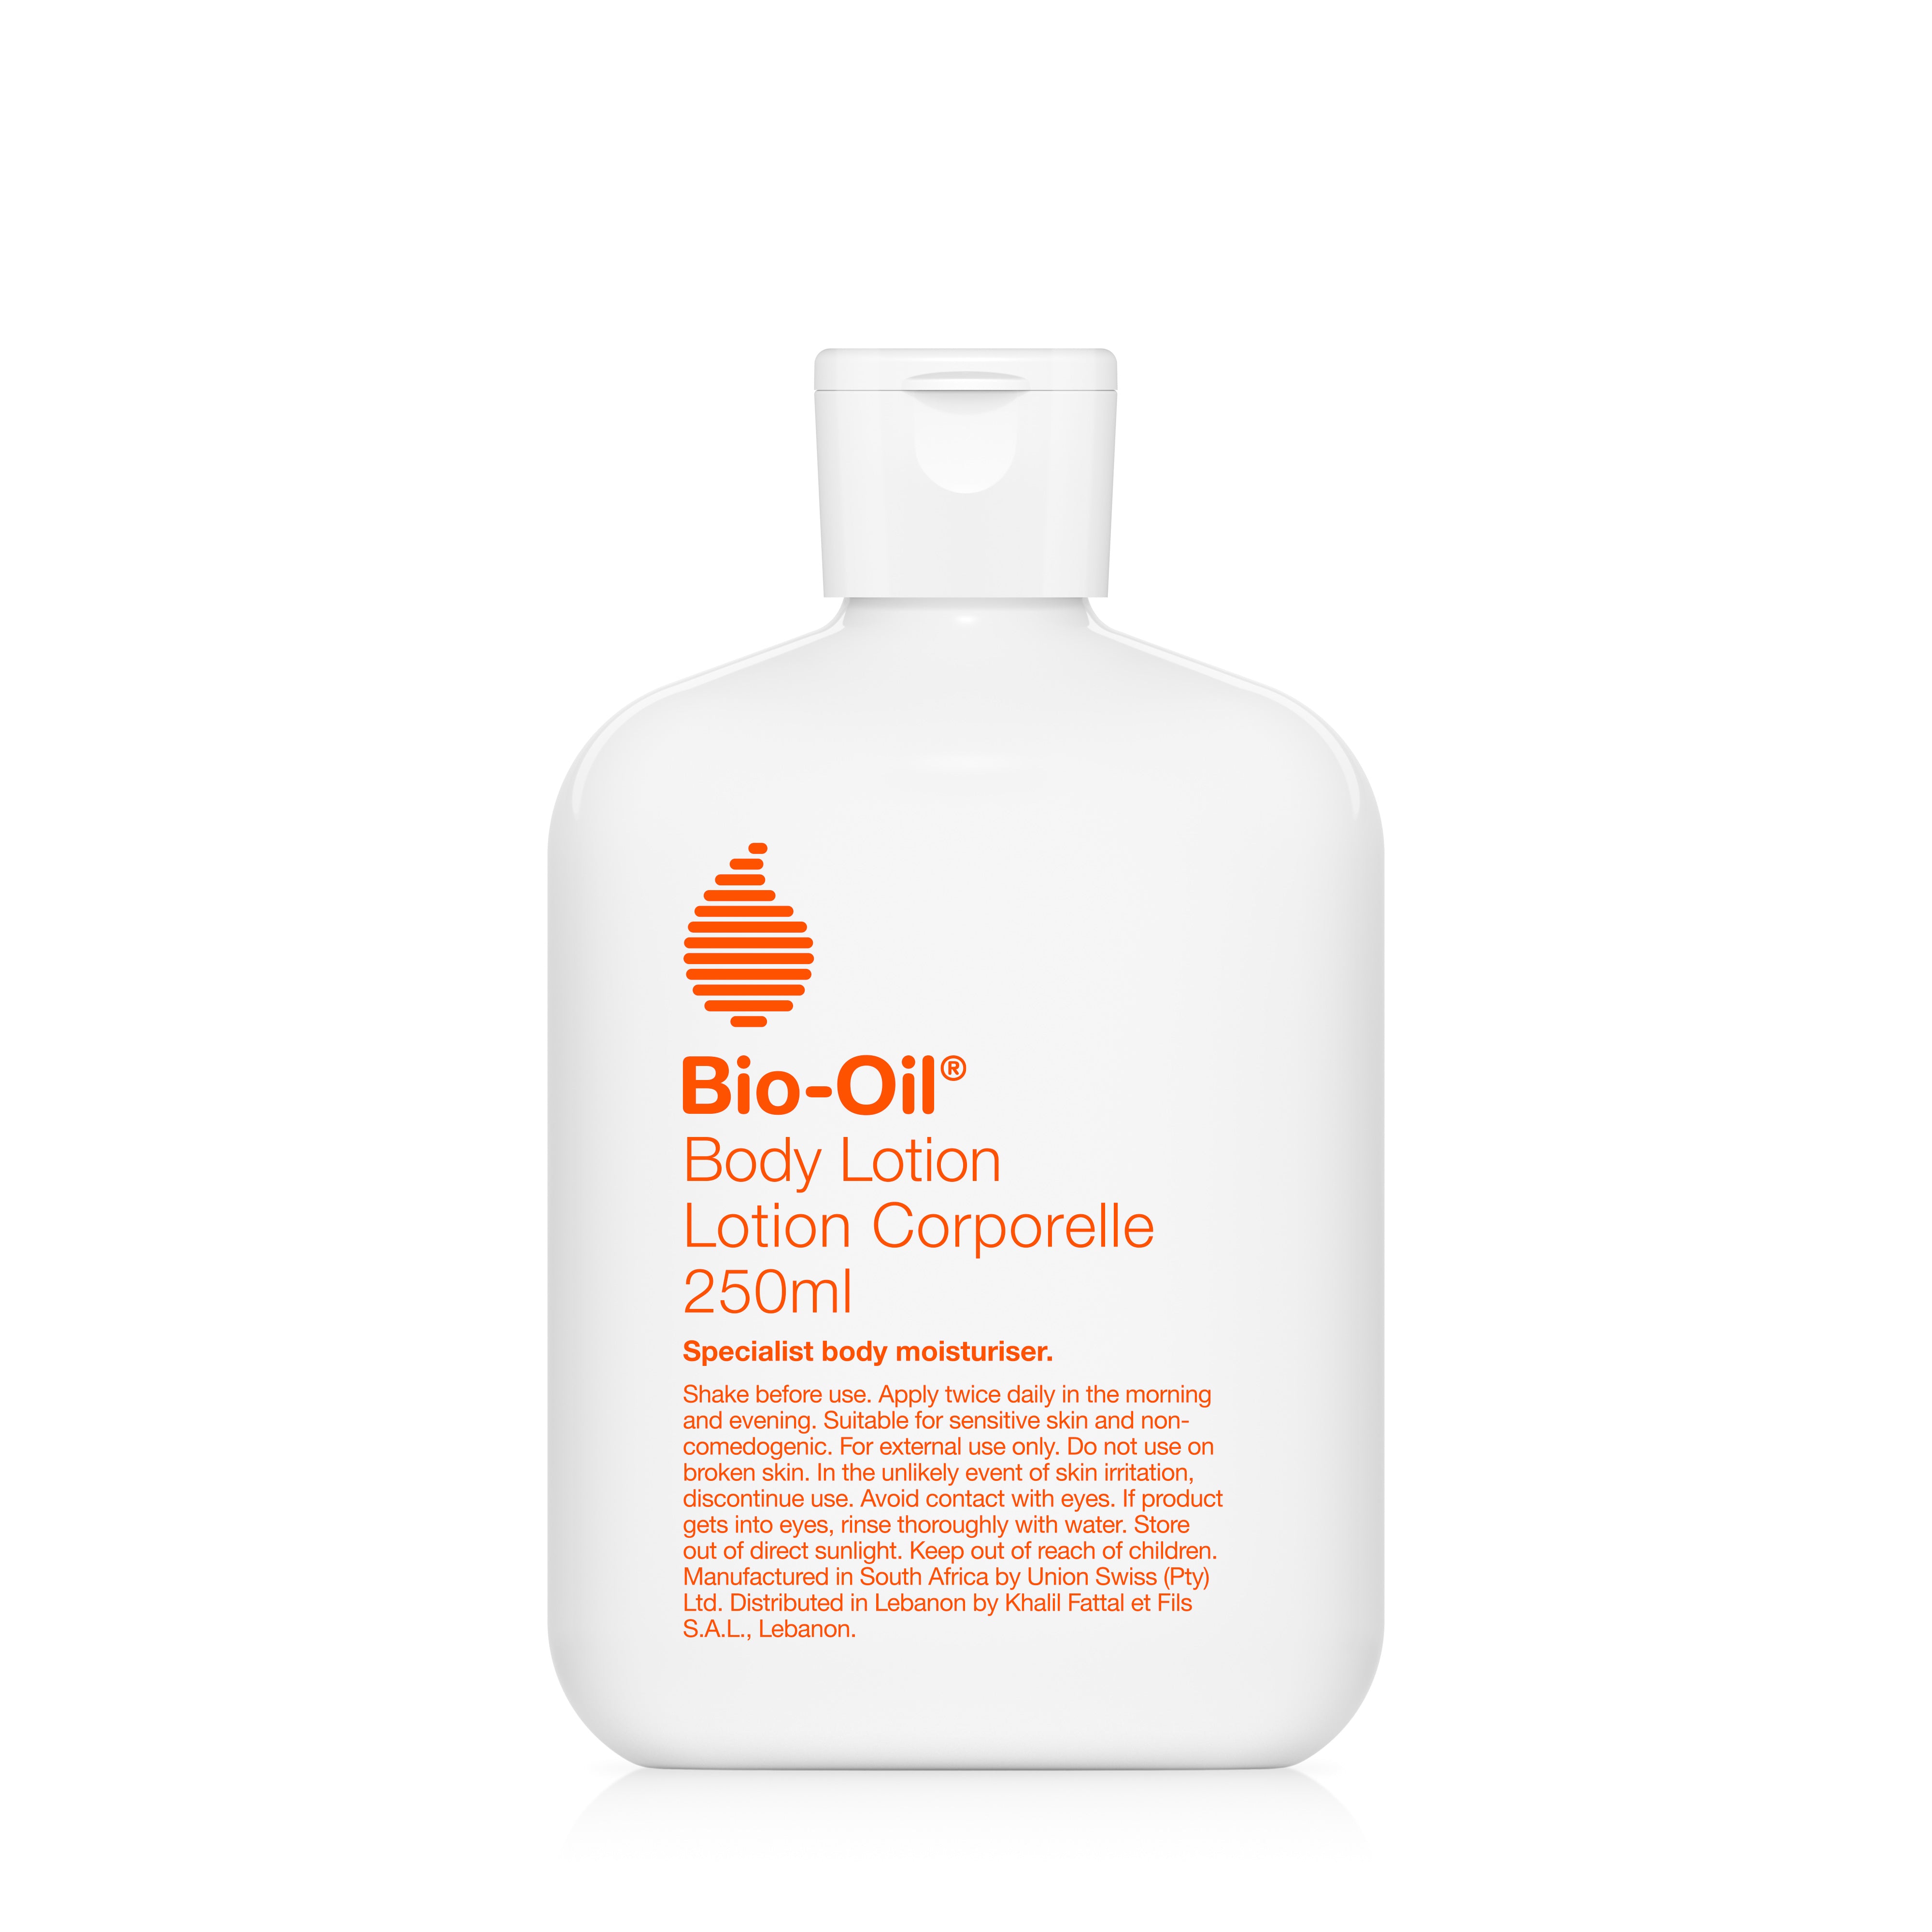 Bio-Oil Dry Skin Gel Is the Brand's First New Product in 30 Years